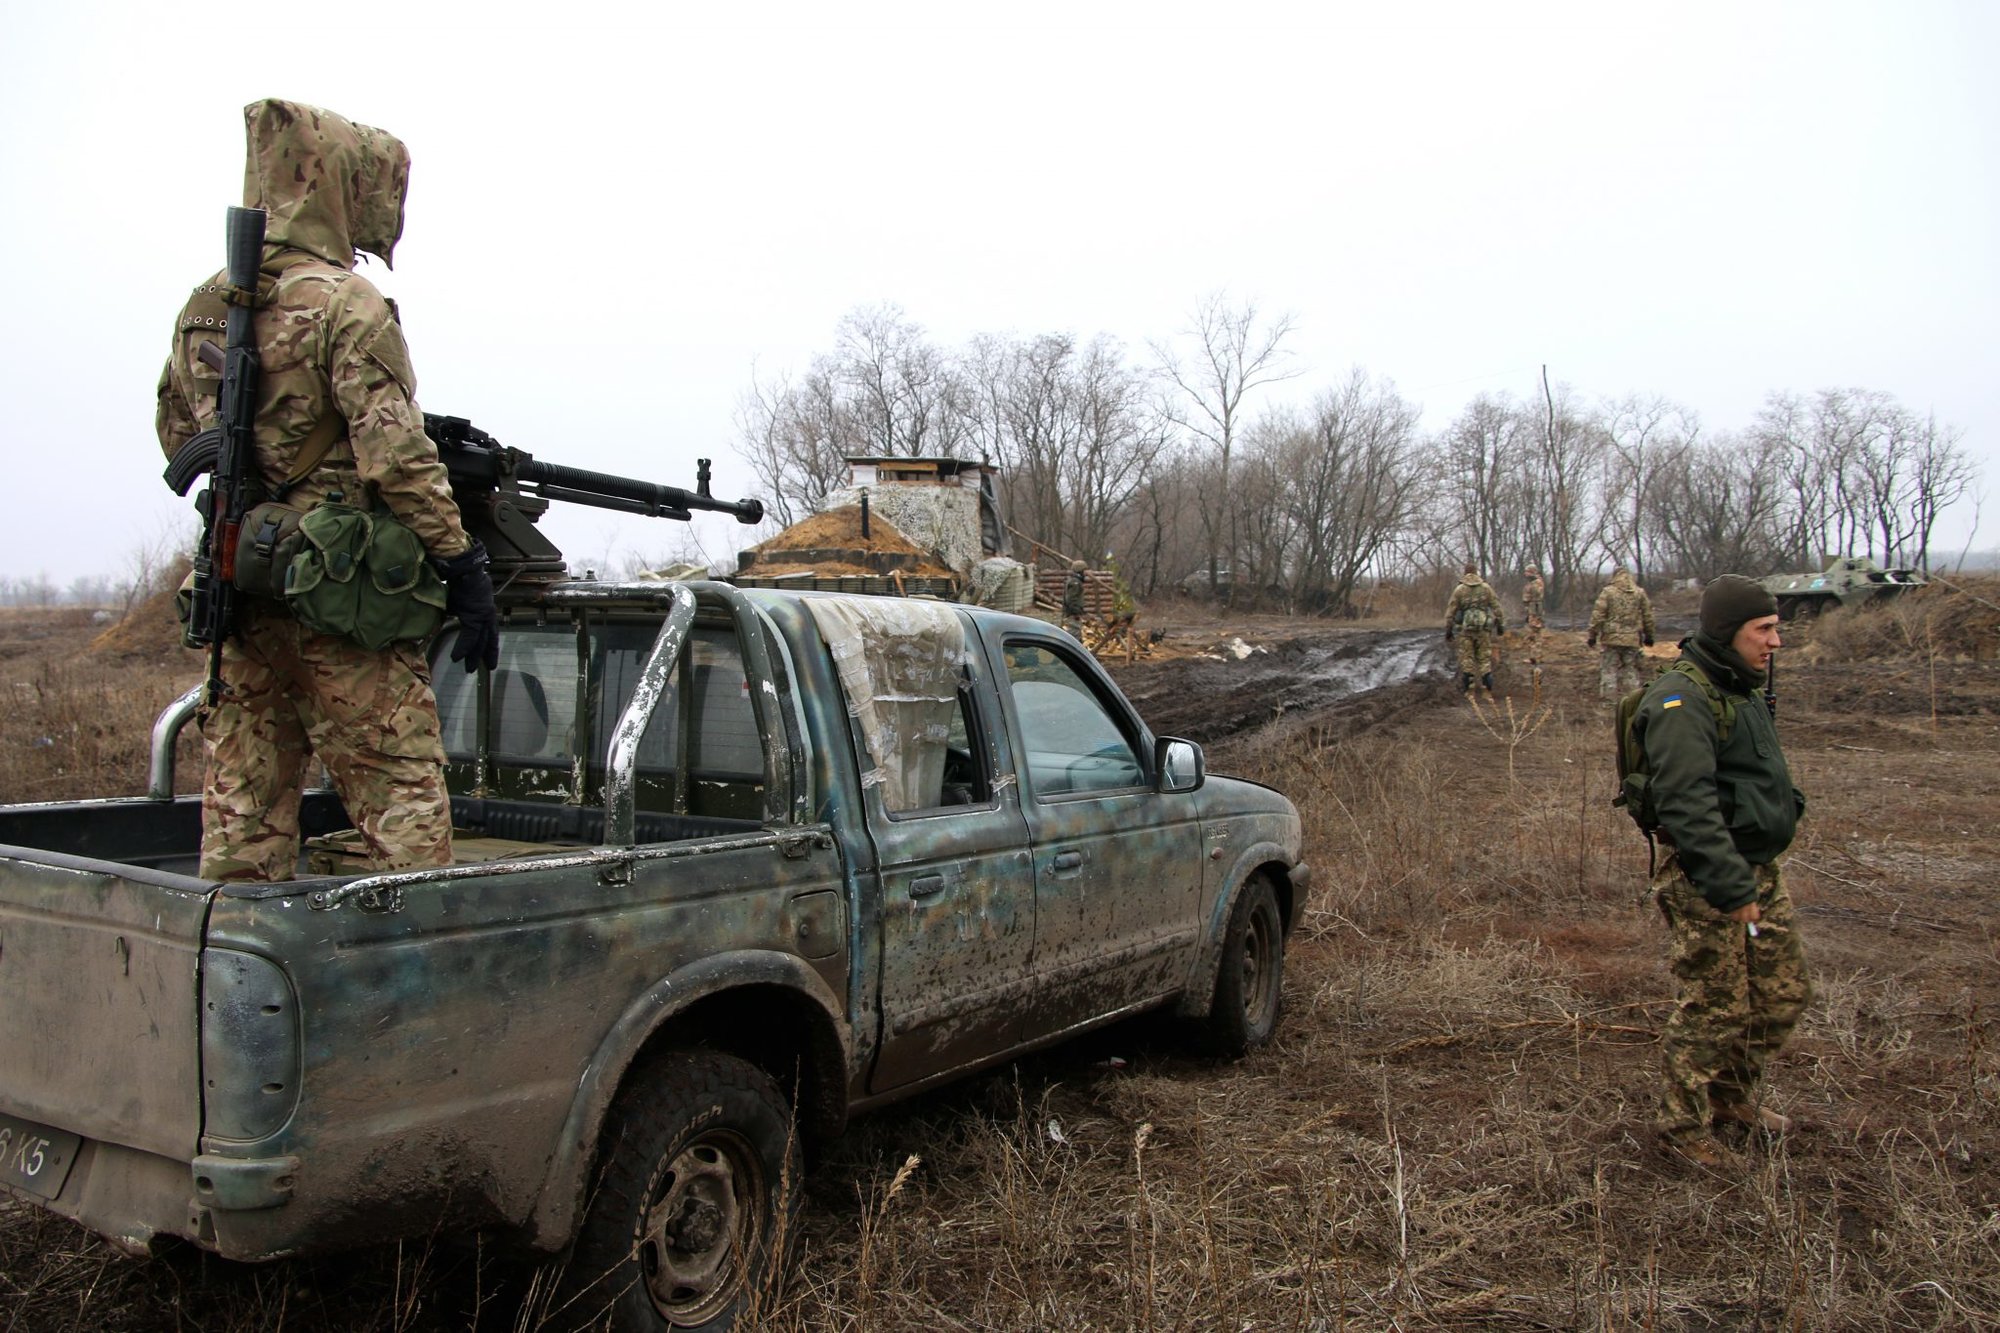 US military aid to Ukraine; Ukrainian soldiers on patrol in the "gray zone" near Lobacheve, Ukraine in February 2016. Photo by Nolan Peterson.